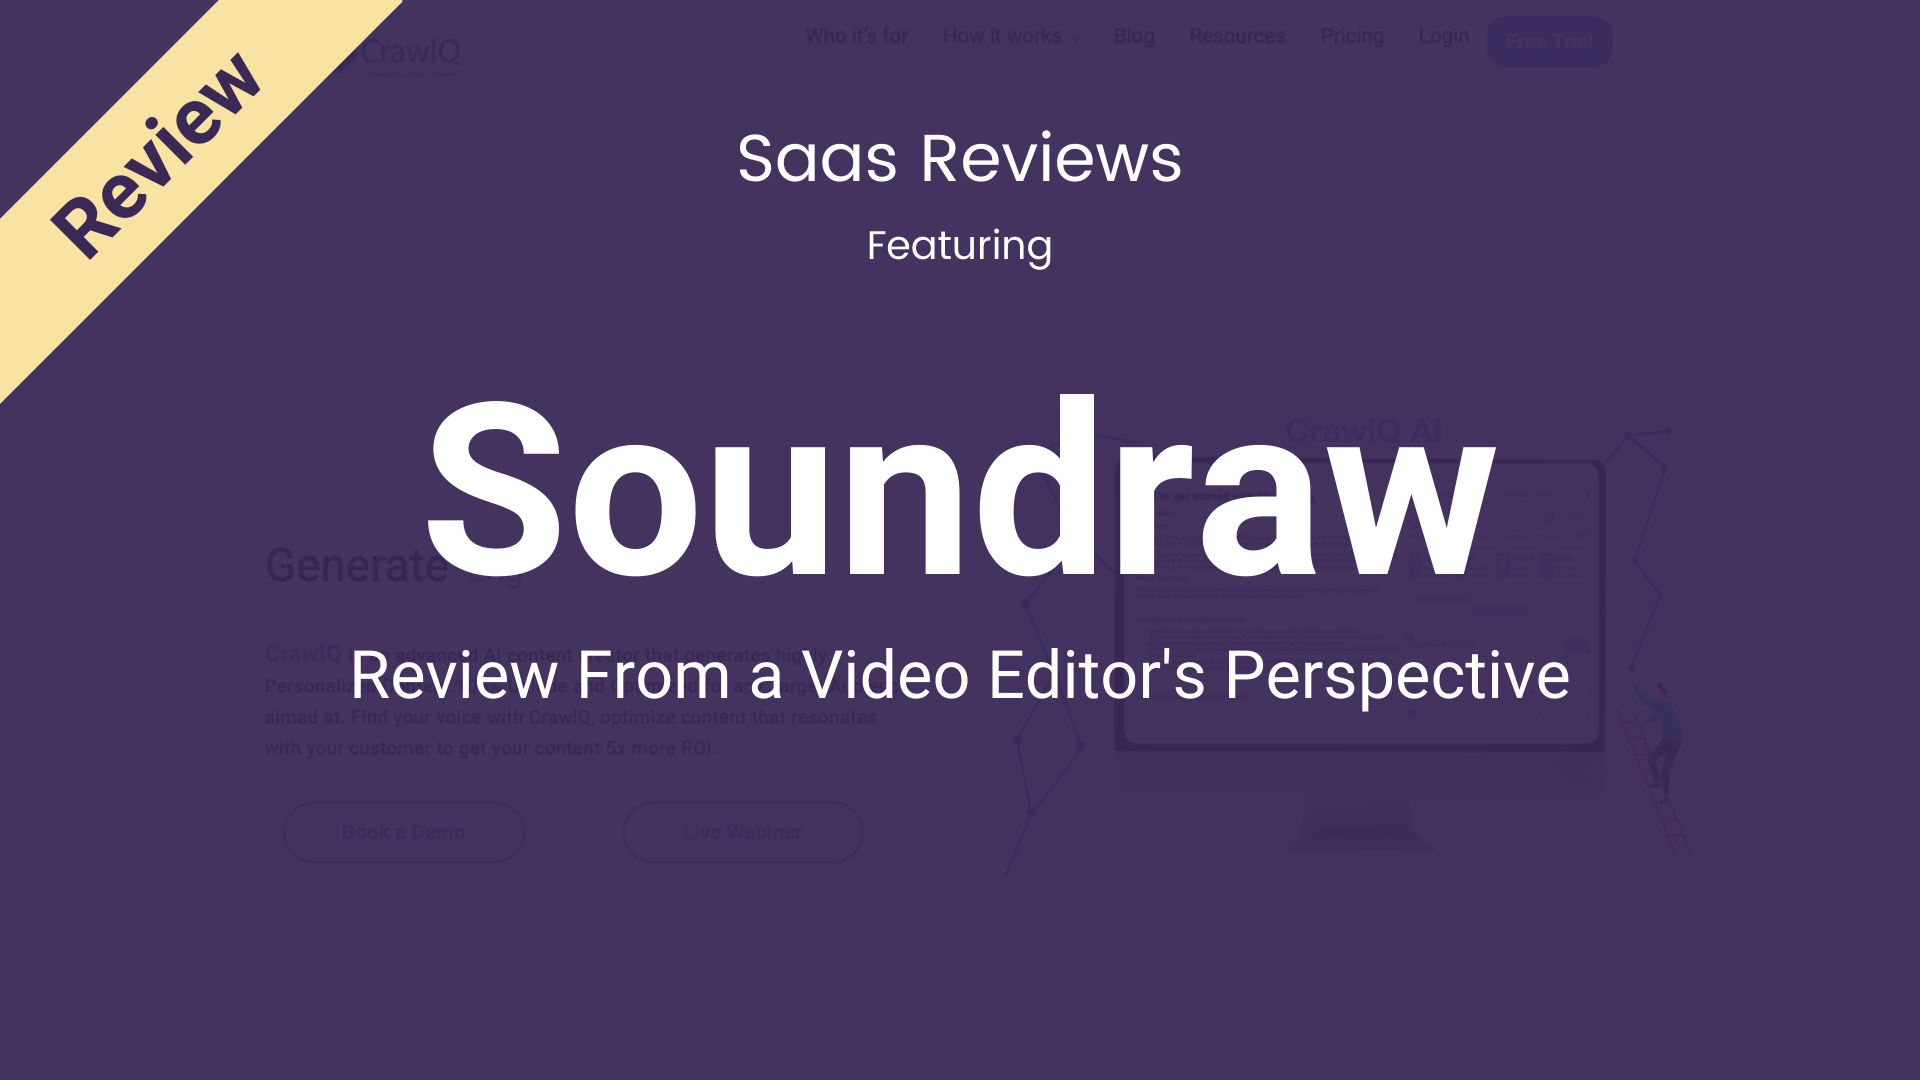 Soundraw Review From a Video Editor’s Perspective